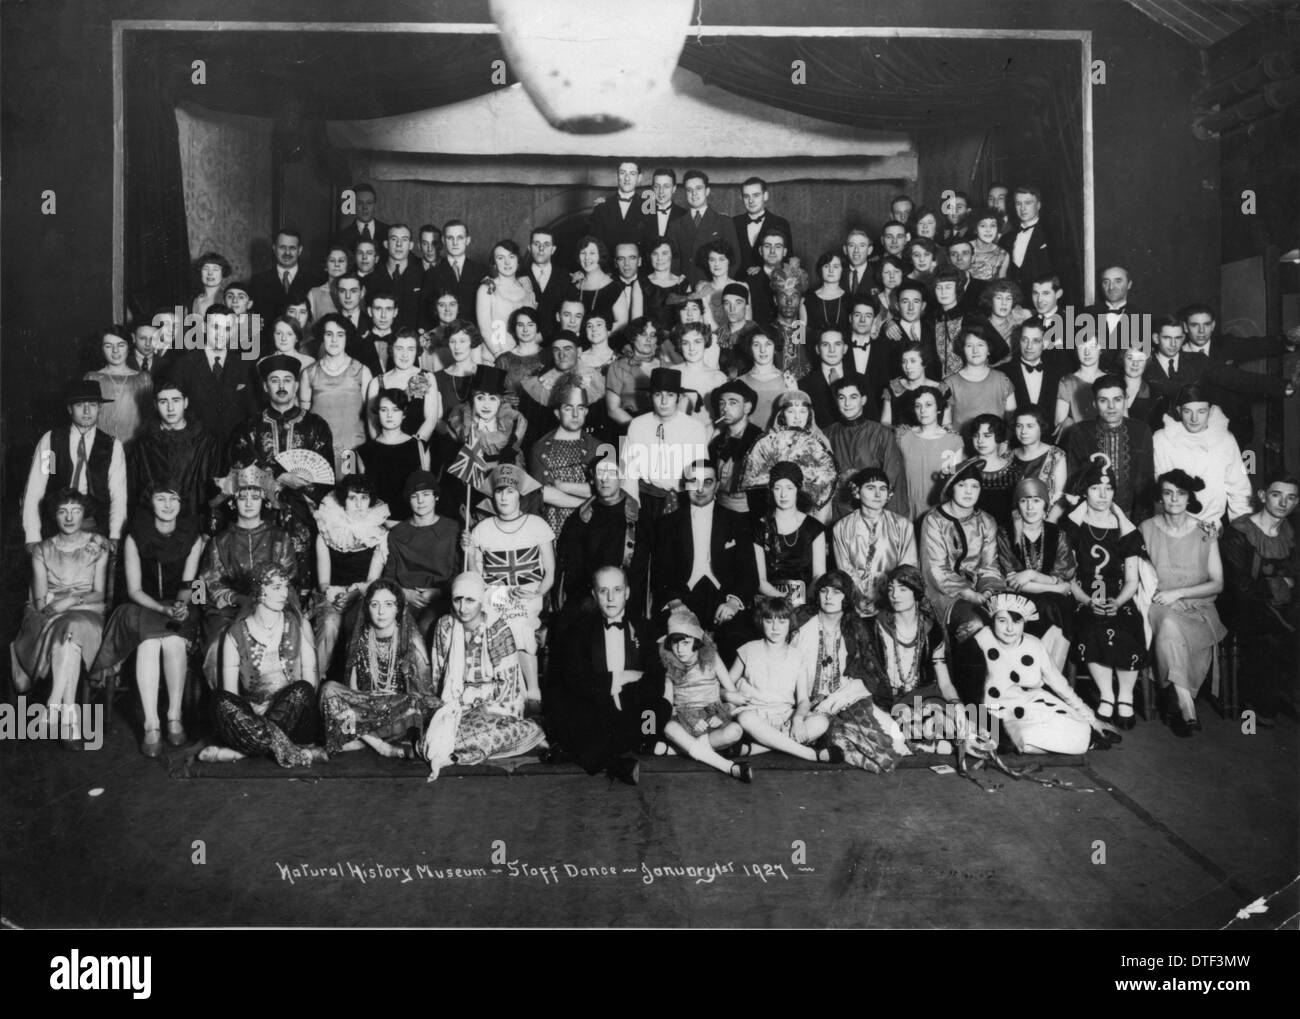 Staff dance, January 1927, The Natural History Museum Stock Photo